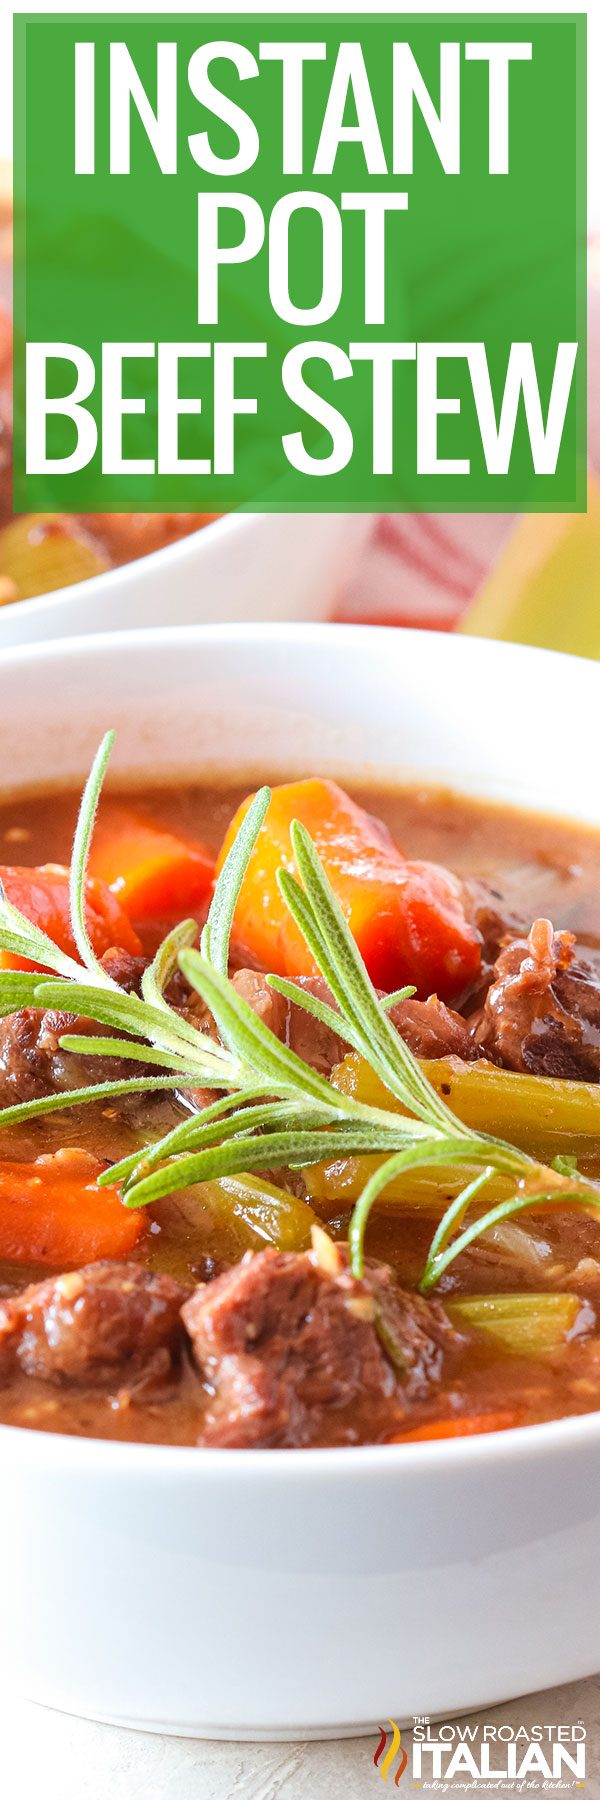 titled collage for instant pot beef stew recipe